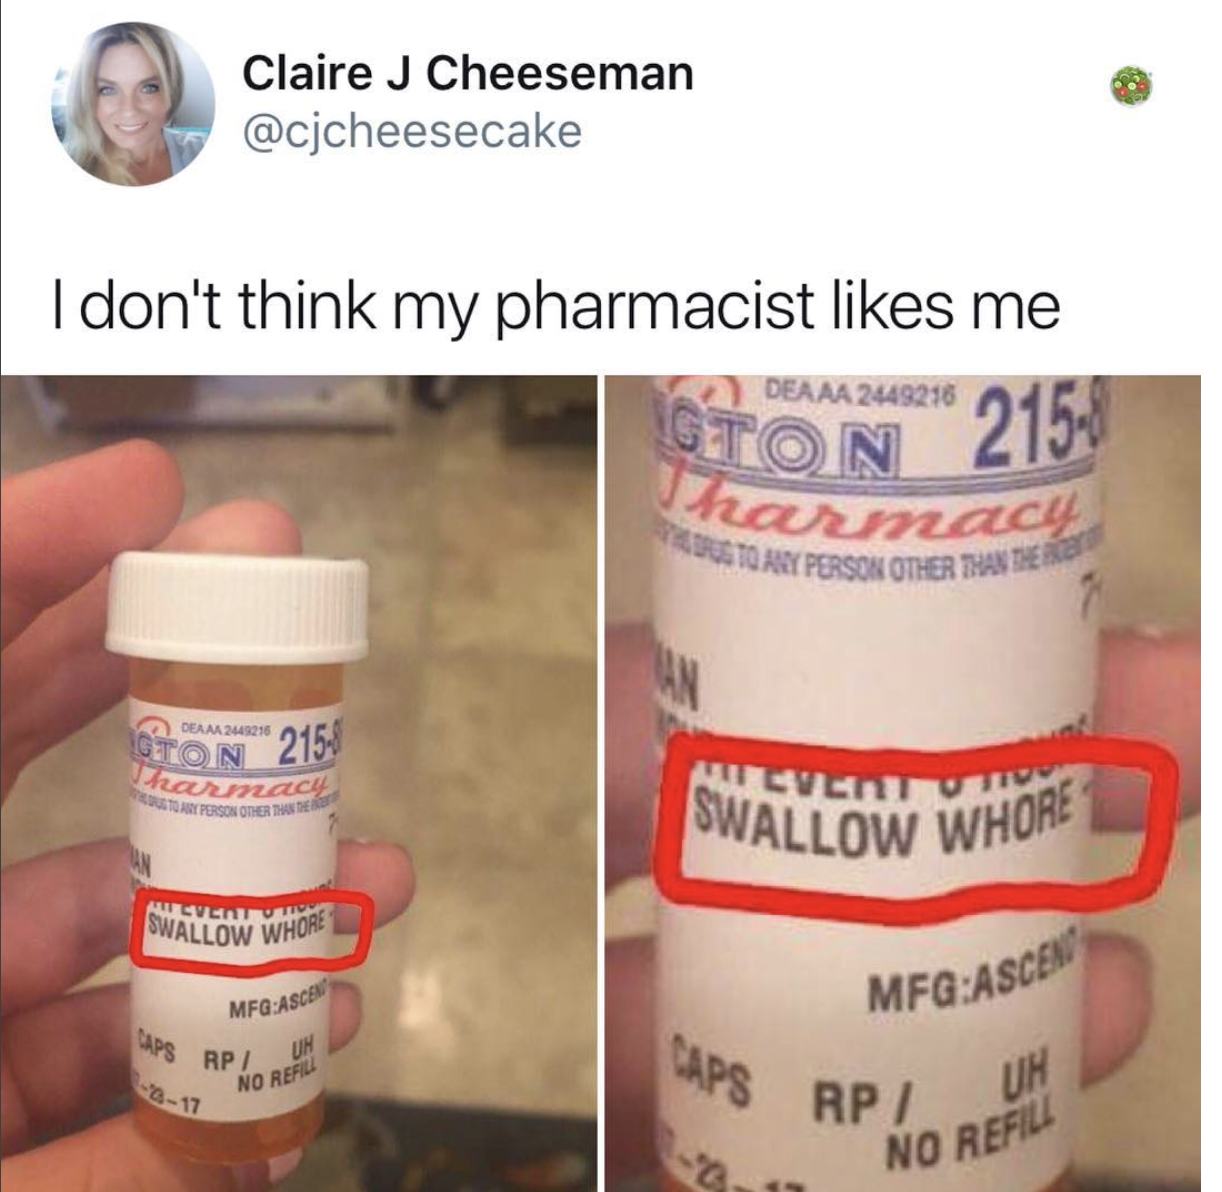 memes - pharmacist meme - Claire J Cheeseman I don't think my pharmacist me Deaaa 2449216 Ston 215 hasnach Any Person Other Thante Gton 2150 Recu Sve Swallow Whore 1 Wallow Who Mfg As MfgAsce Rp No Res Rpi Uh No Refil